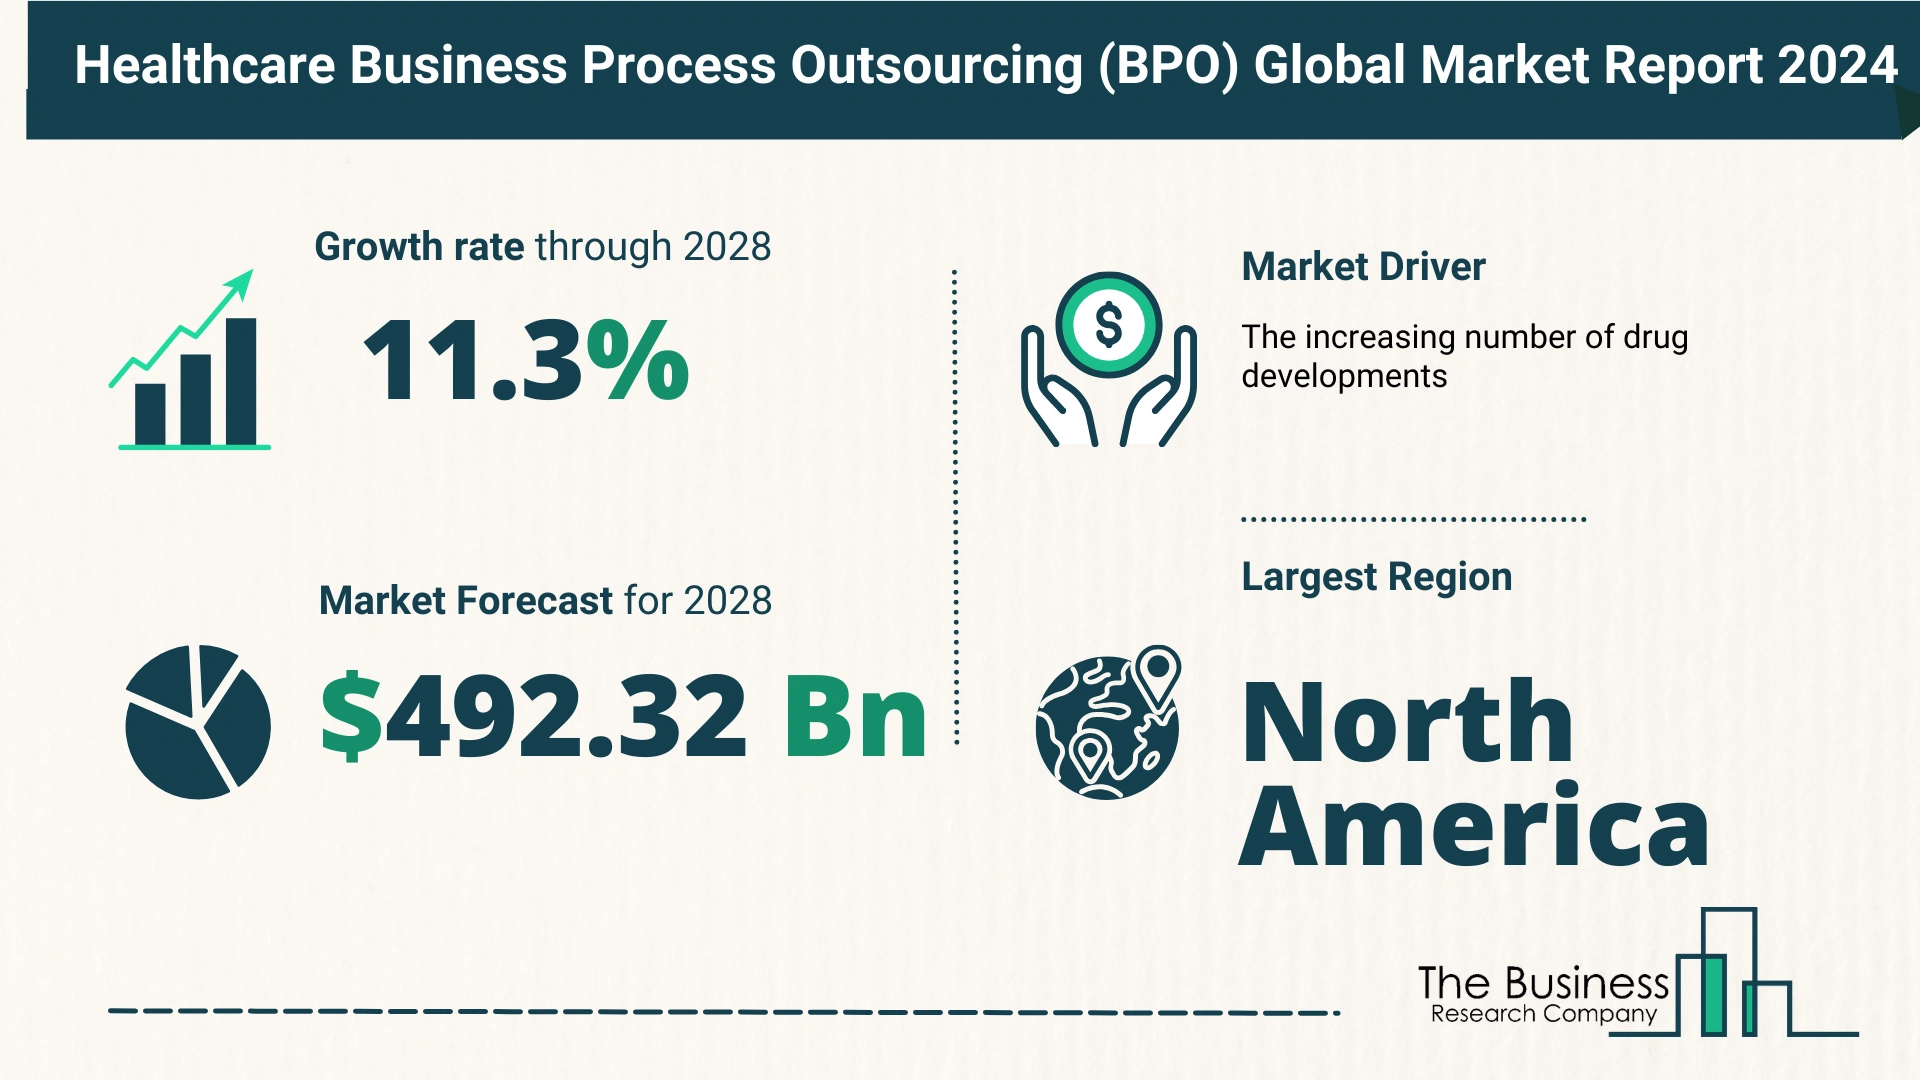 Global Healthcare Business Process Outsourcing (BPO) Market Size